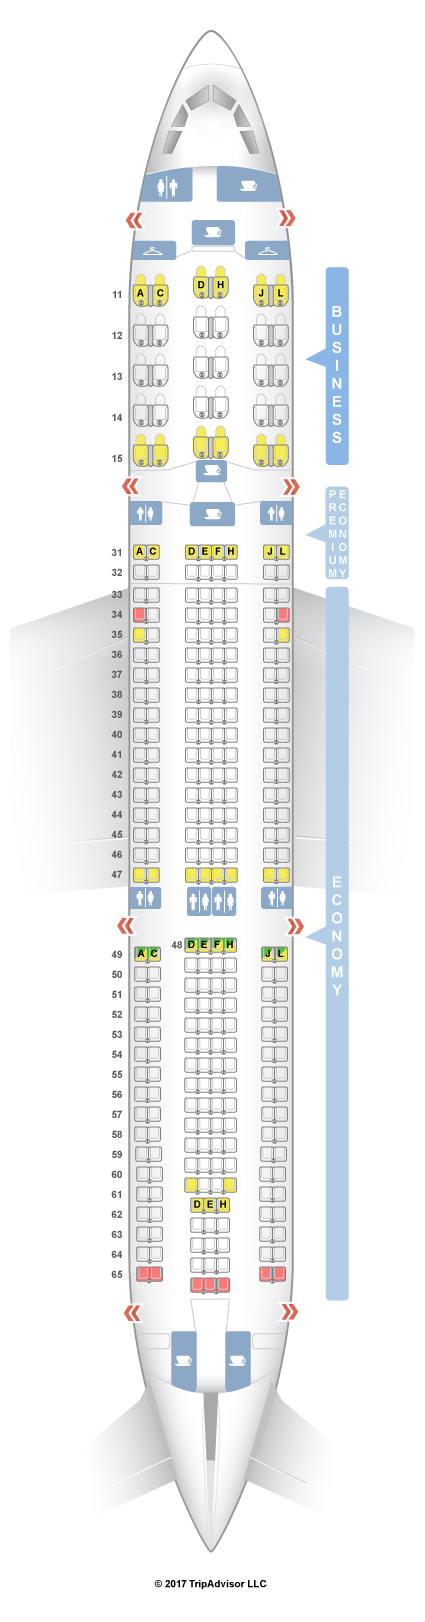 A333 Seating Chart